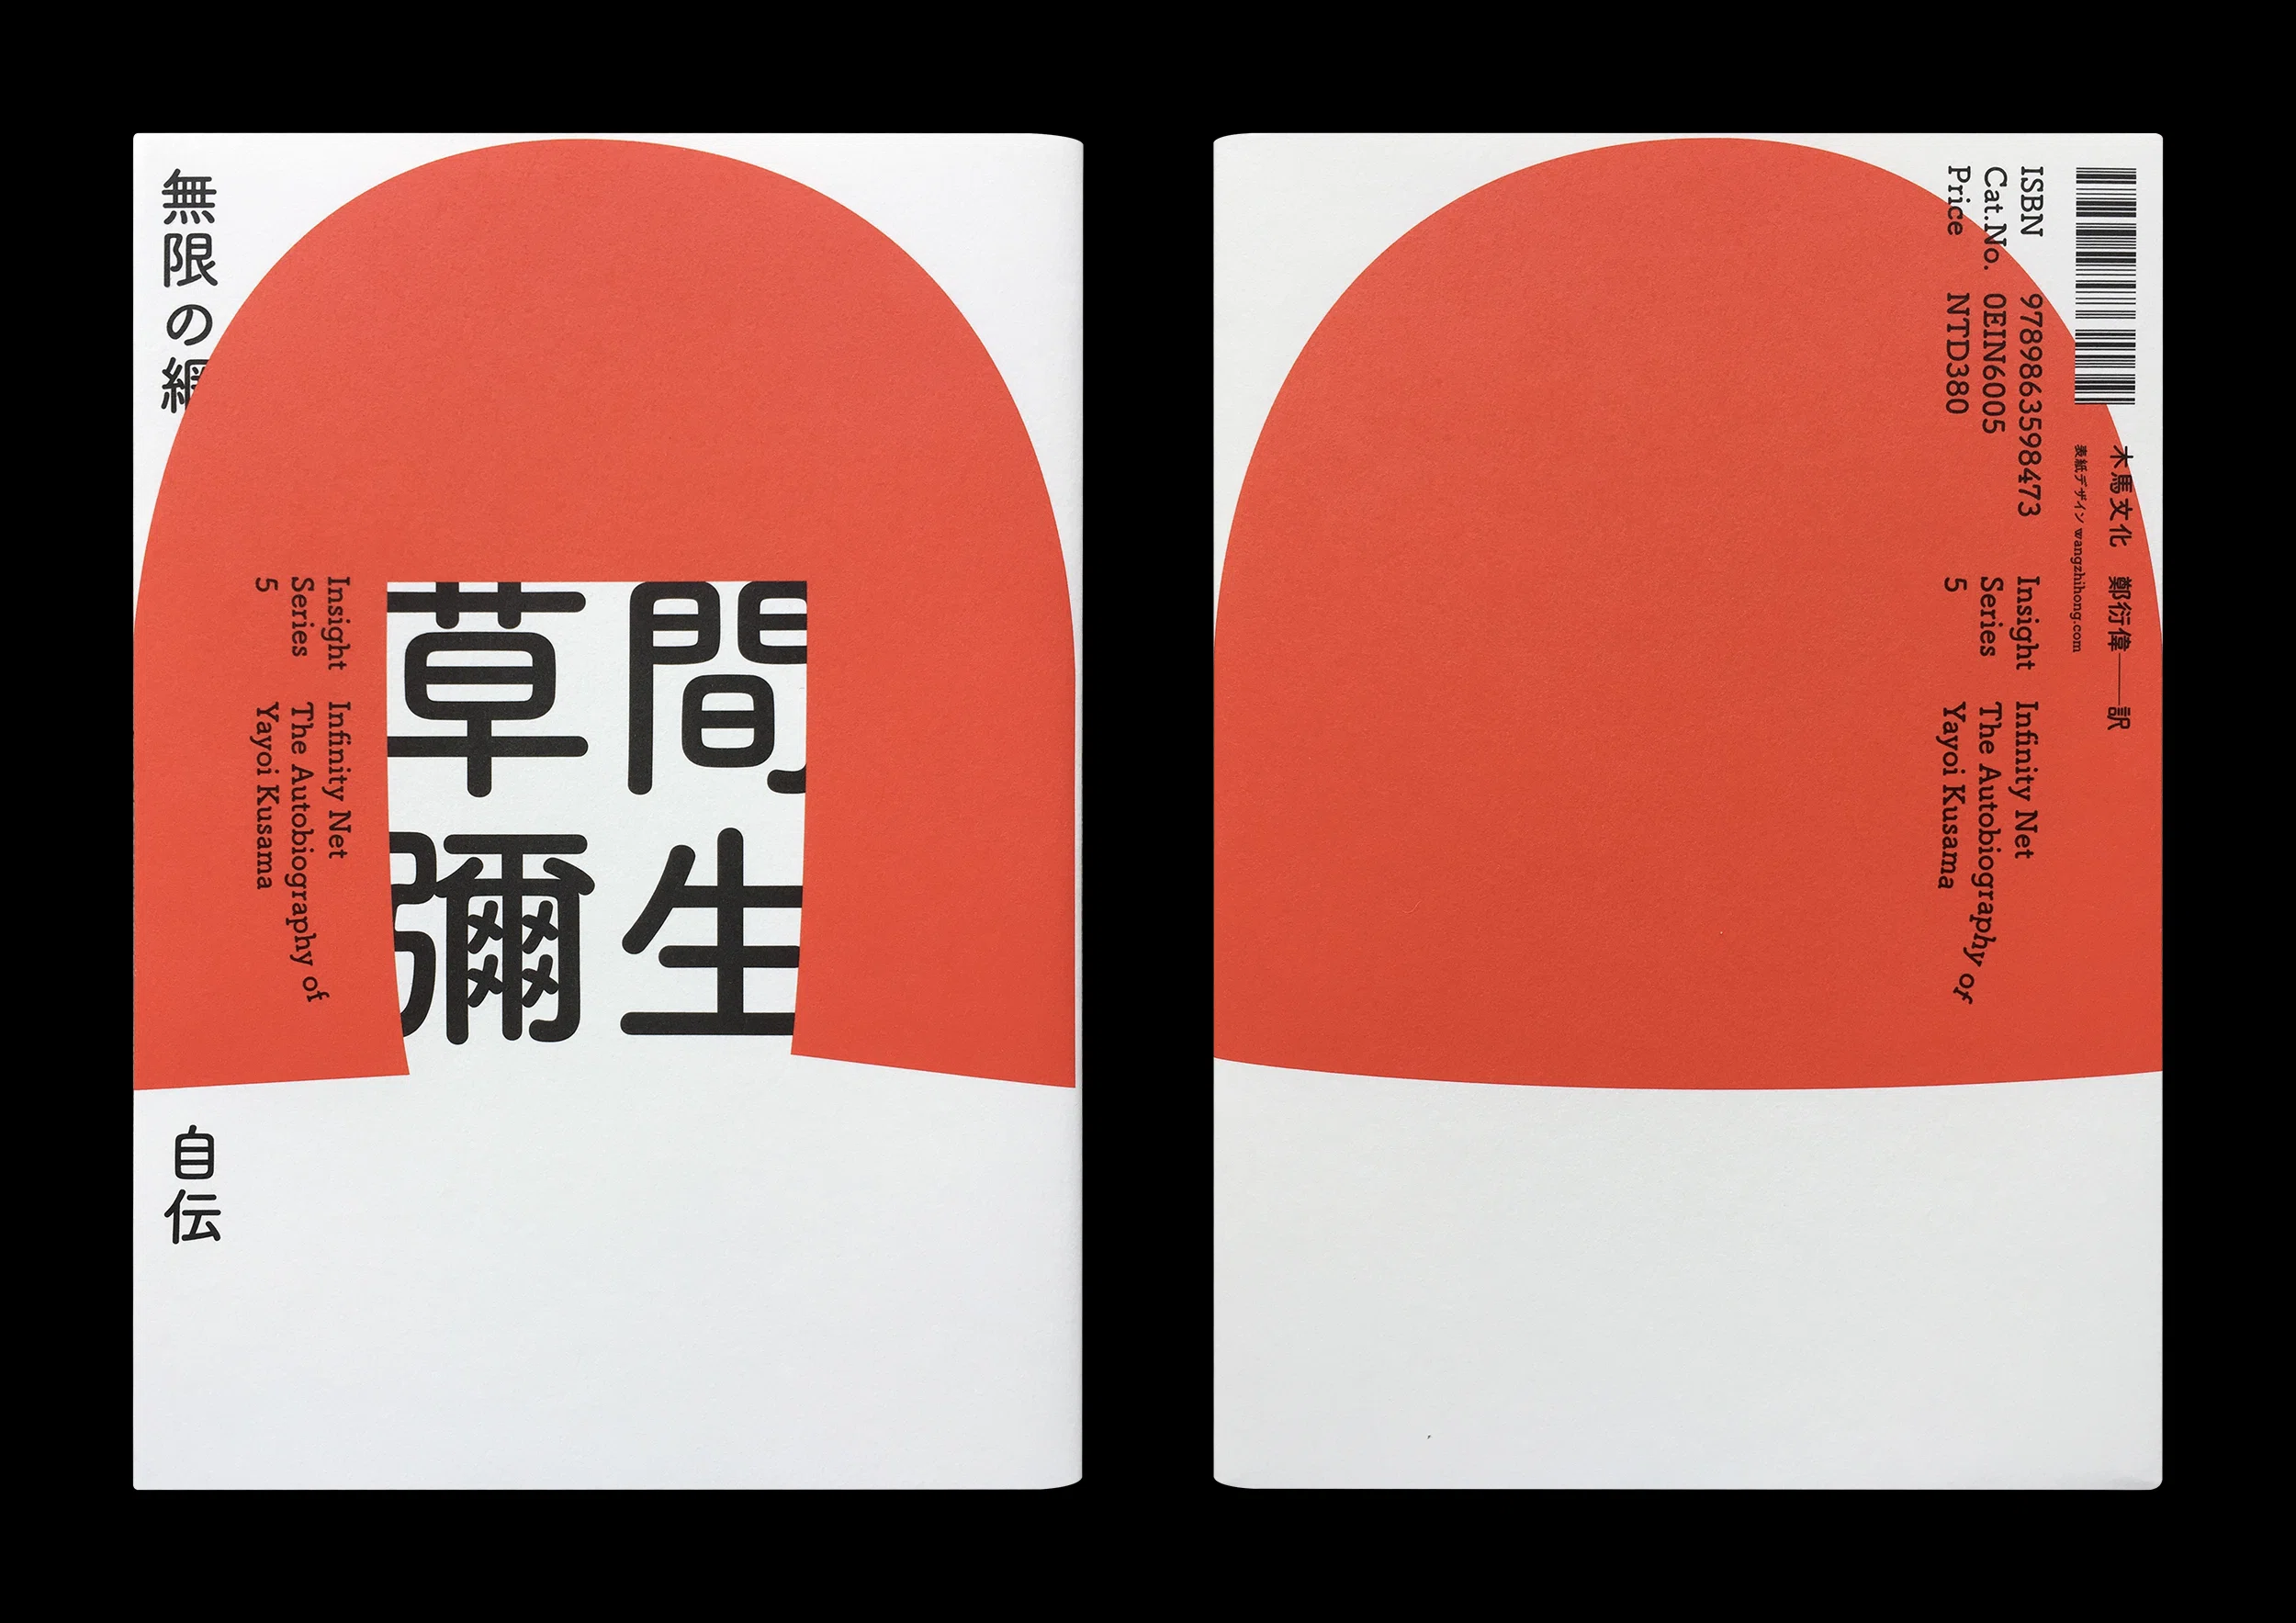 Wang Zhi-Hong highlights the importance of typography in his